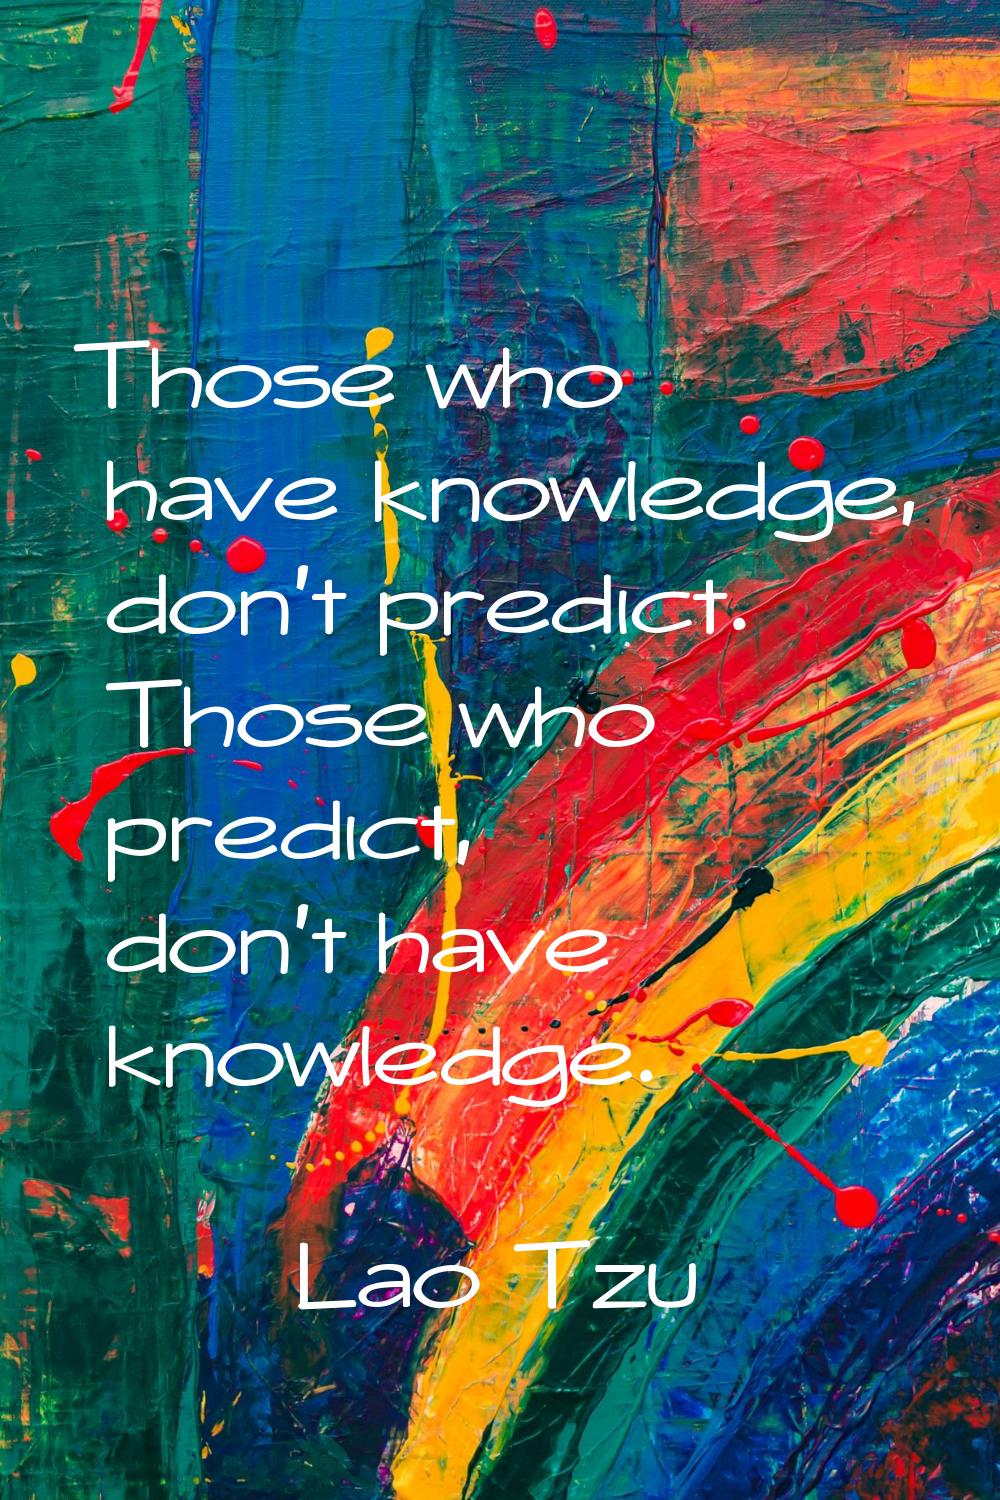 Those who have knowledge, don't predict. Those who predict, don't have knowledge.